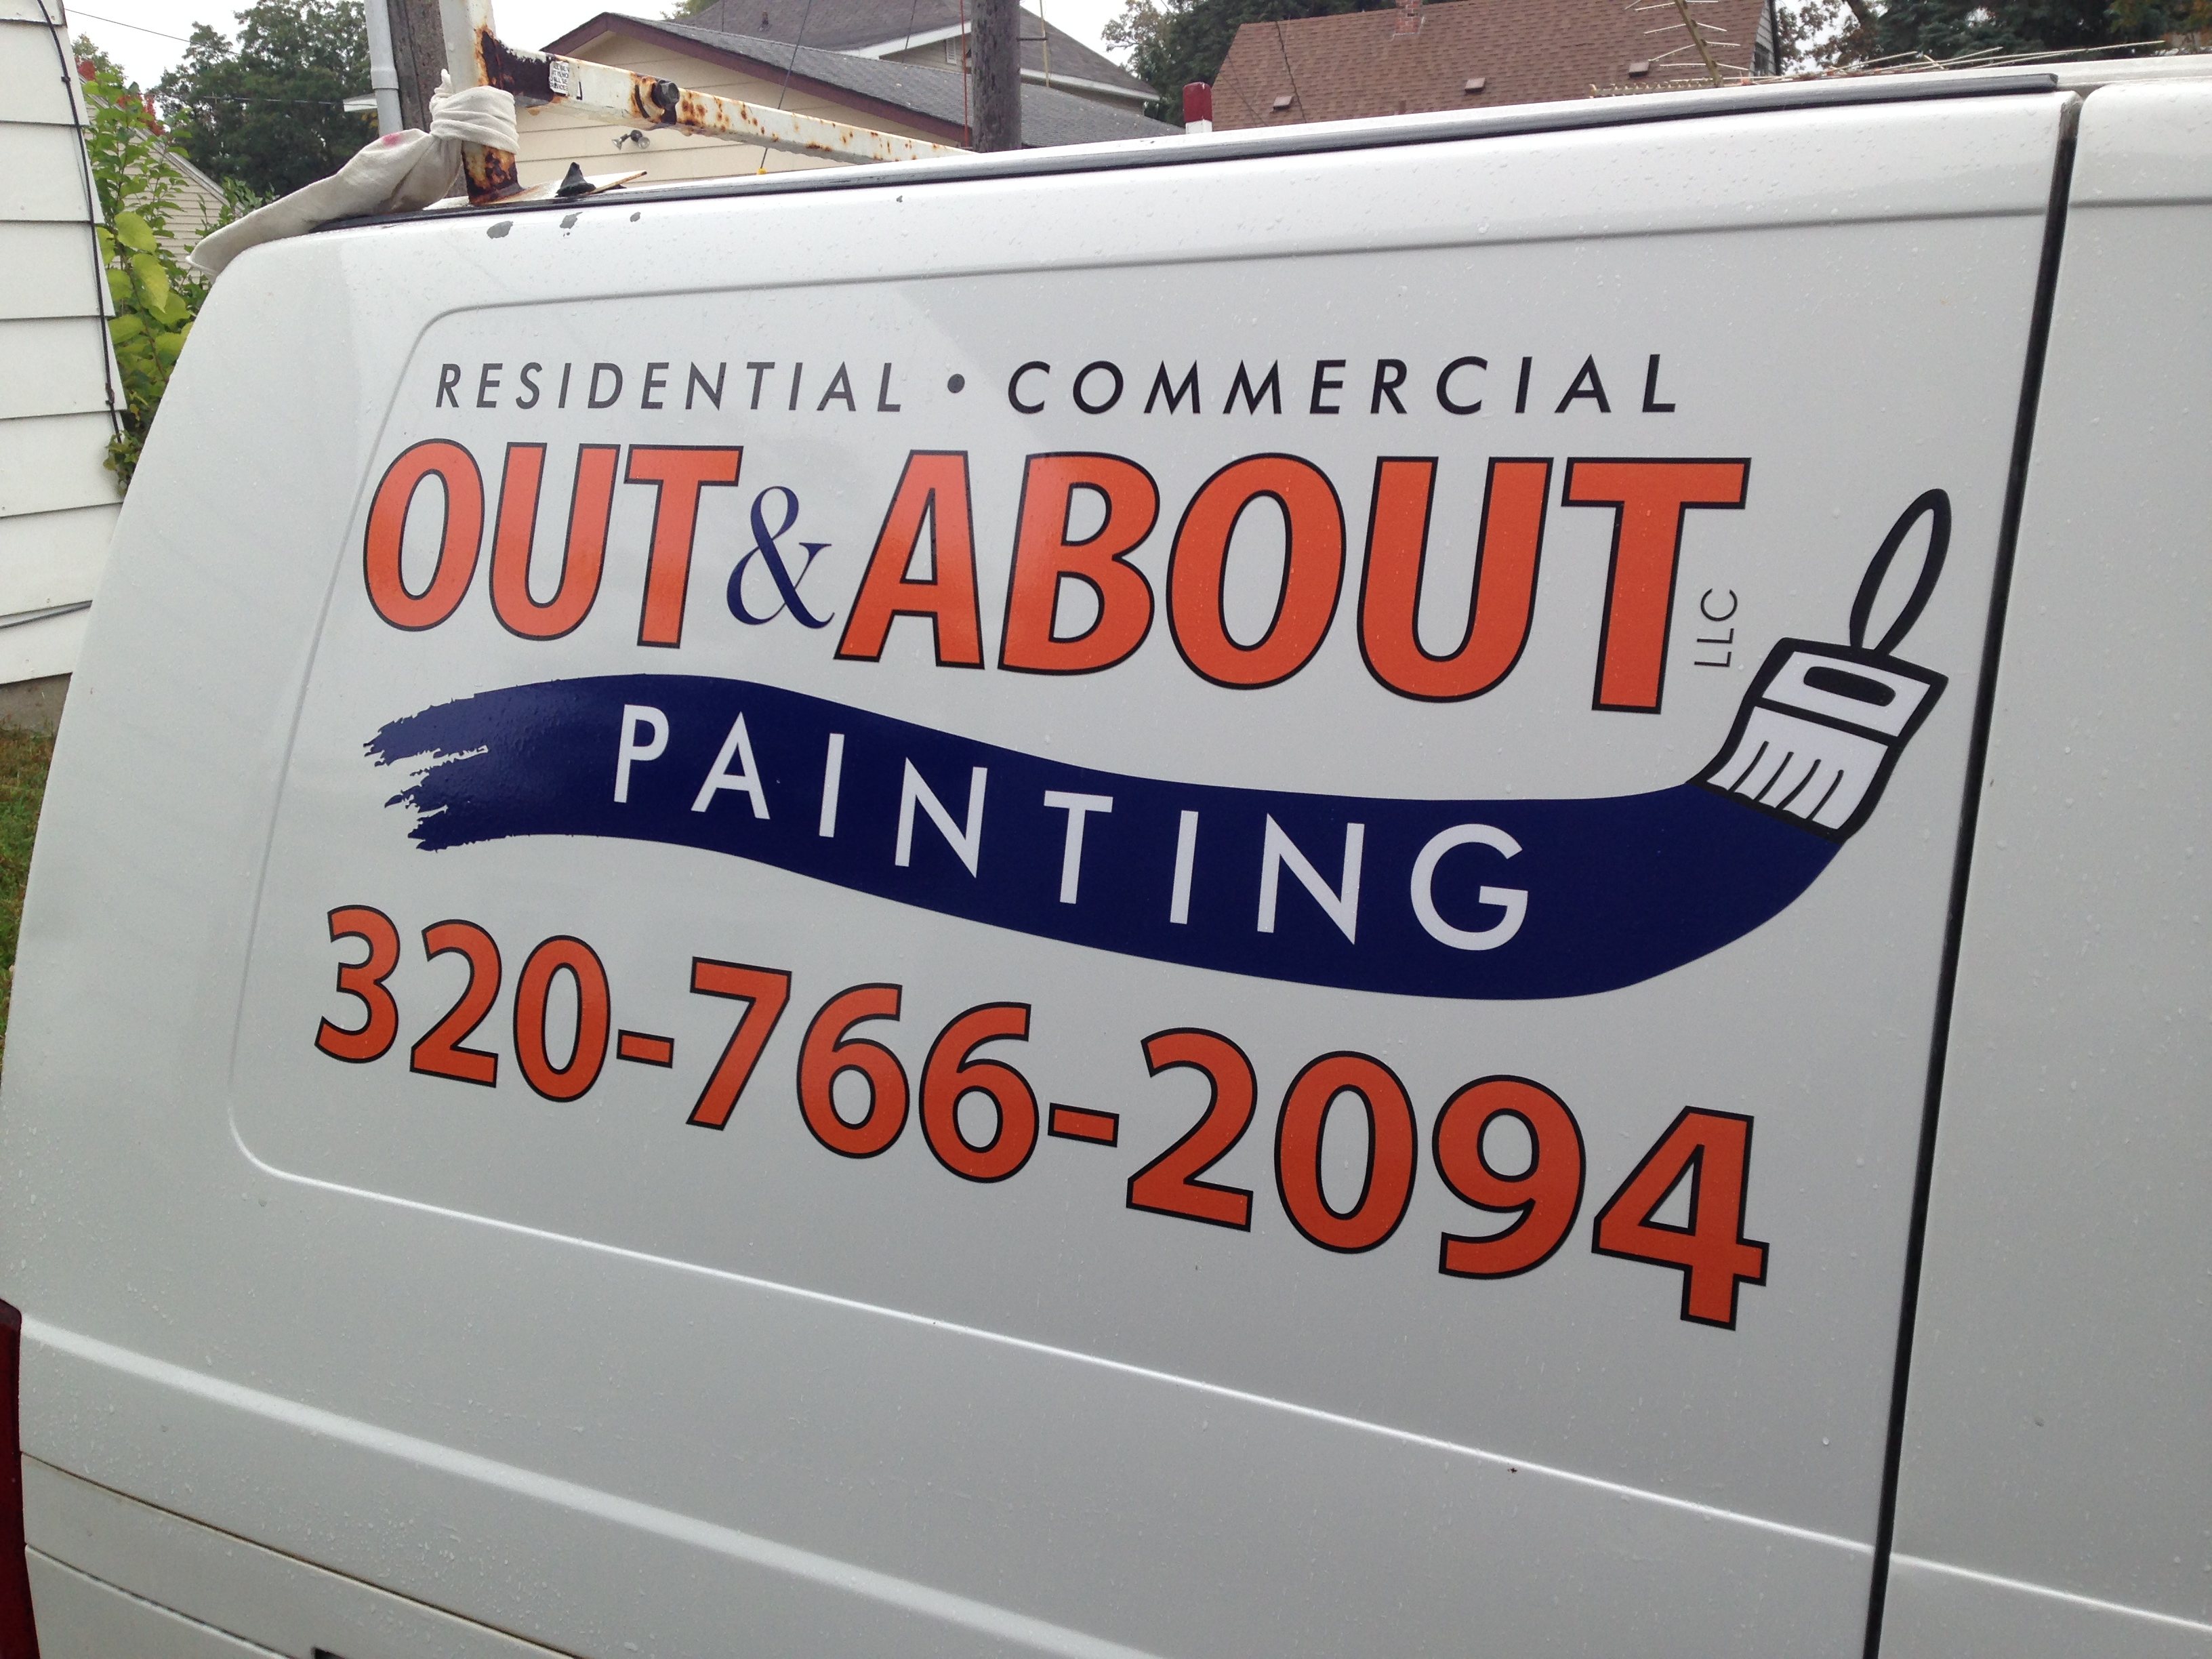 Custom Business Vehicle Graphics from Signmax in Alexandria, MN